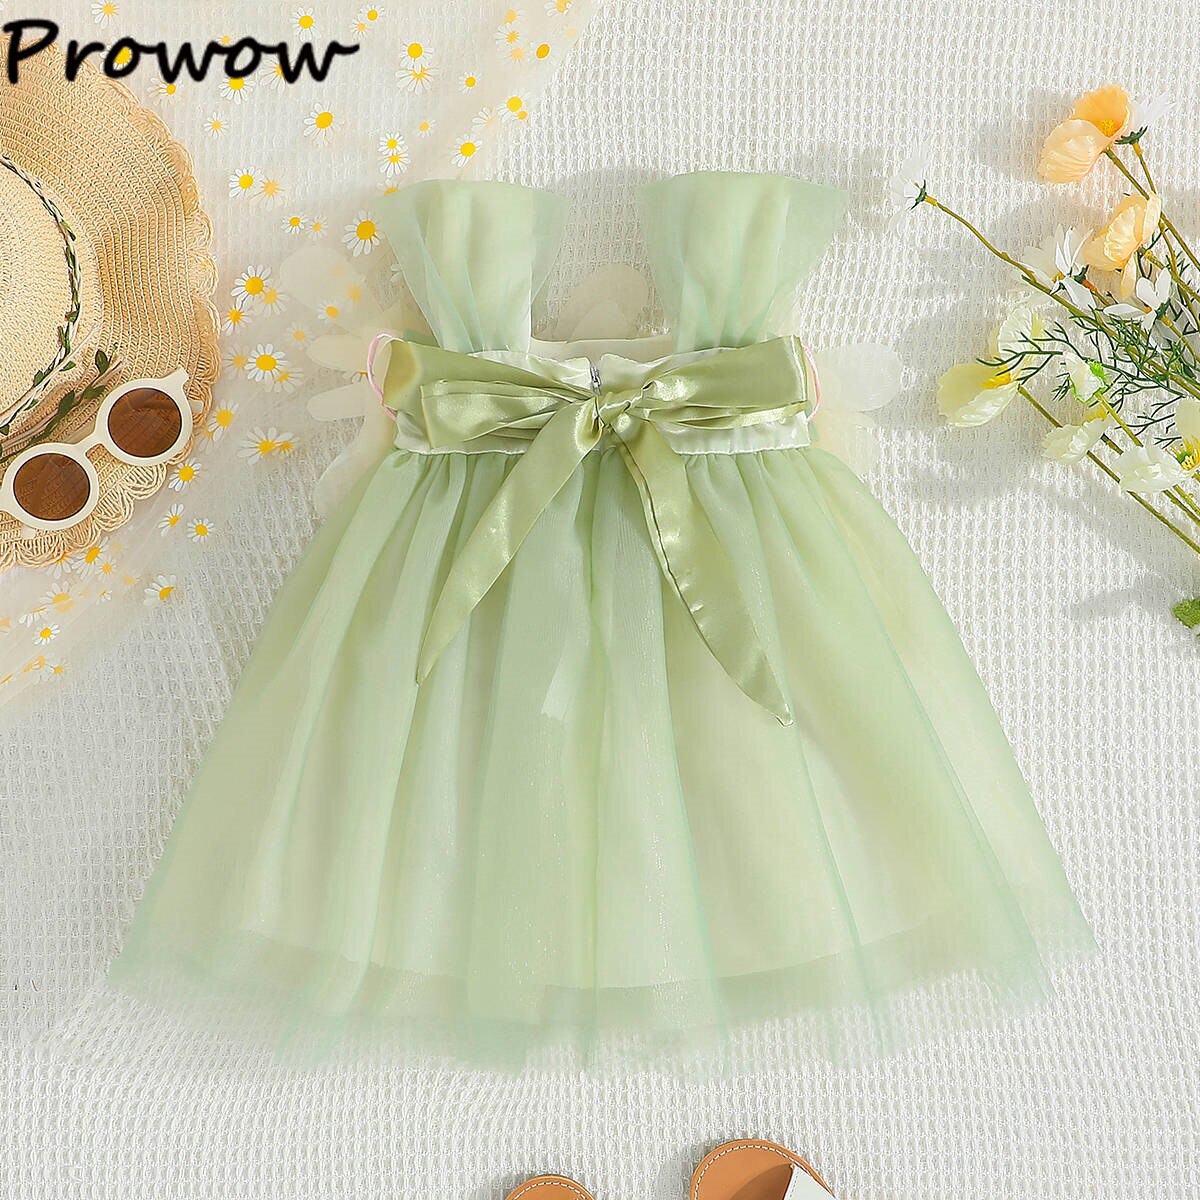 Prowow-1-6Y-2023-Summer-Children-Dresses-Applique-Flower-Princess-Party-Brithday-Dress-For-Girls-Baby-1